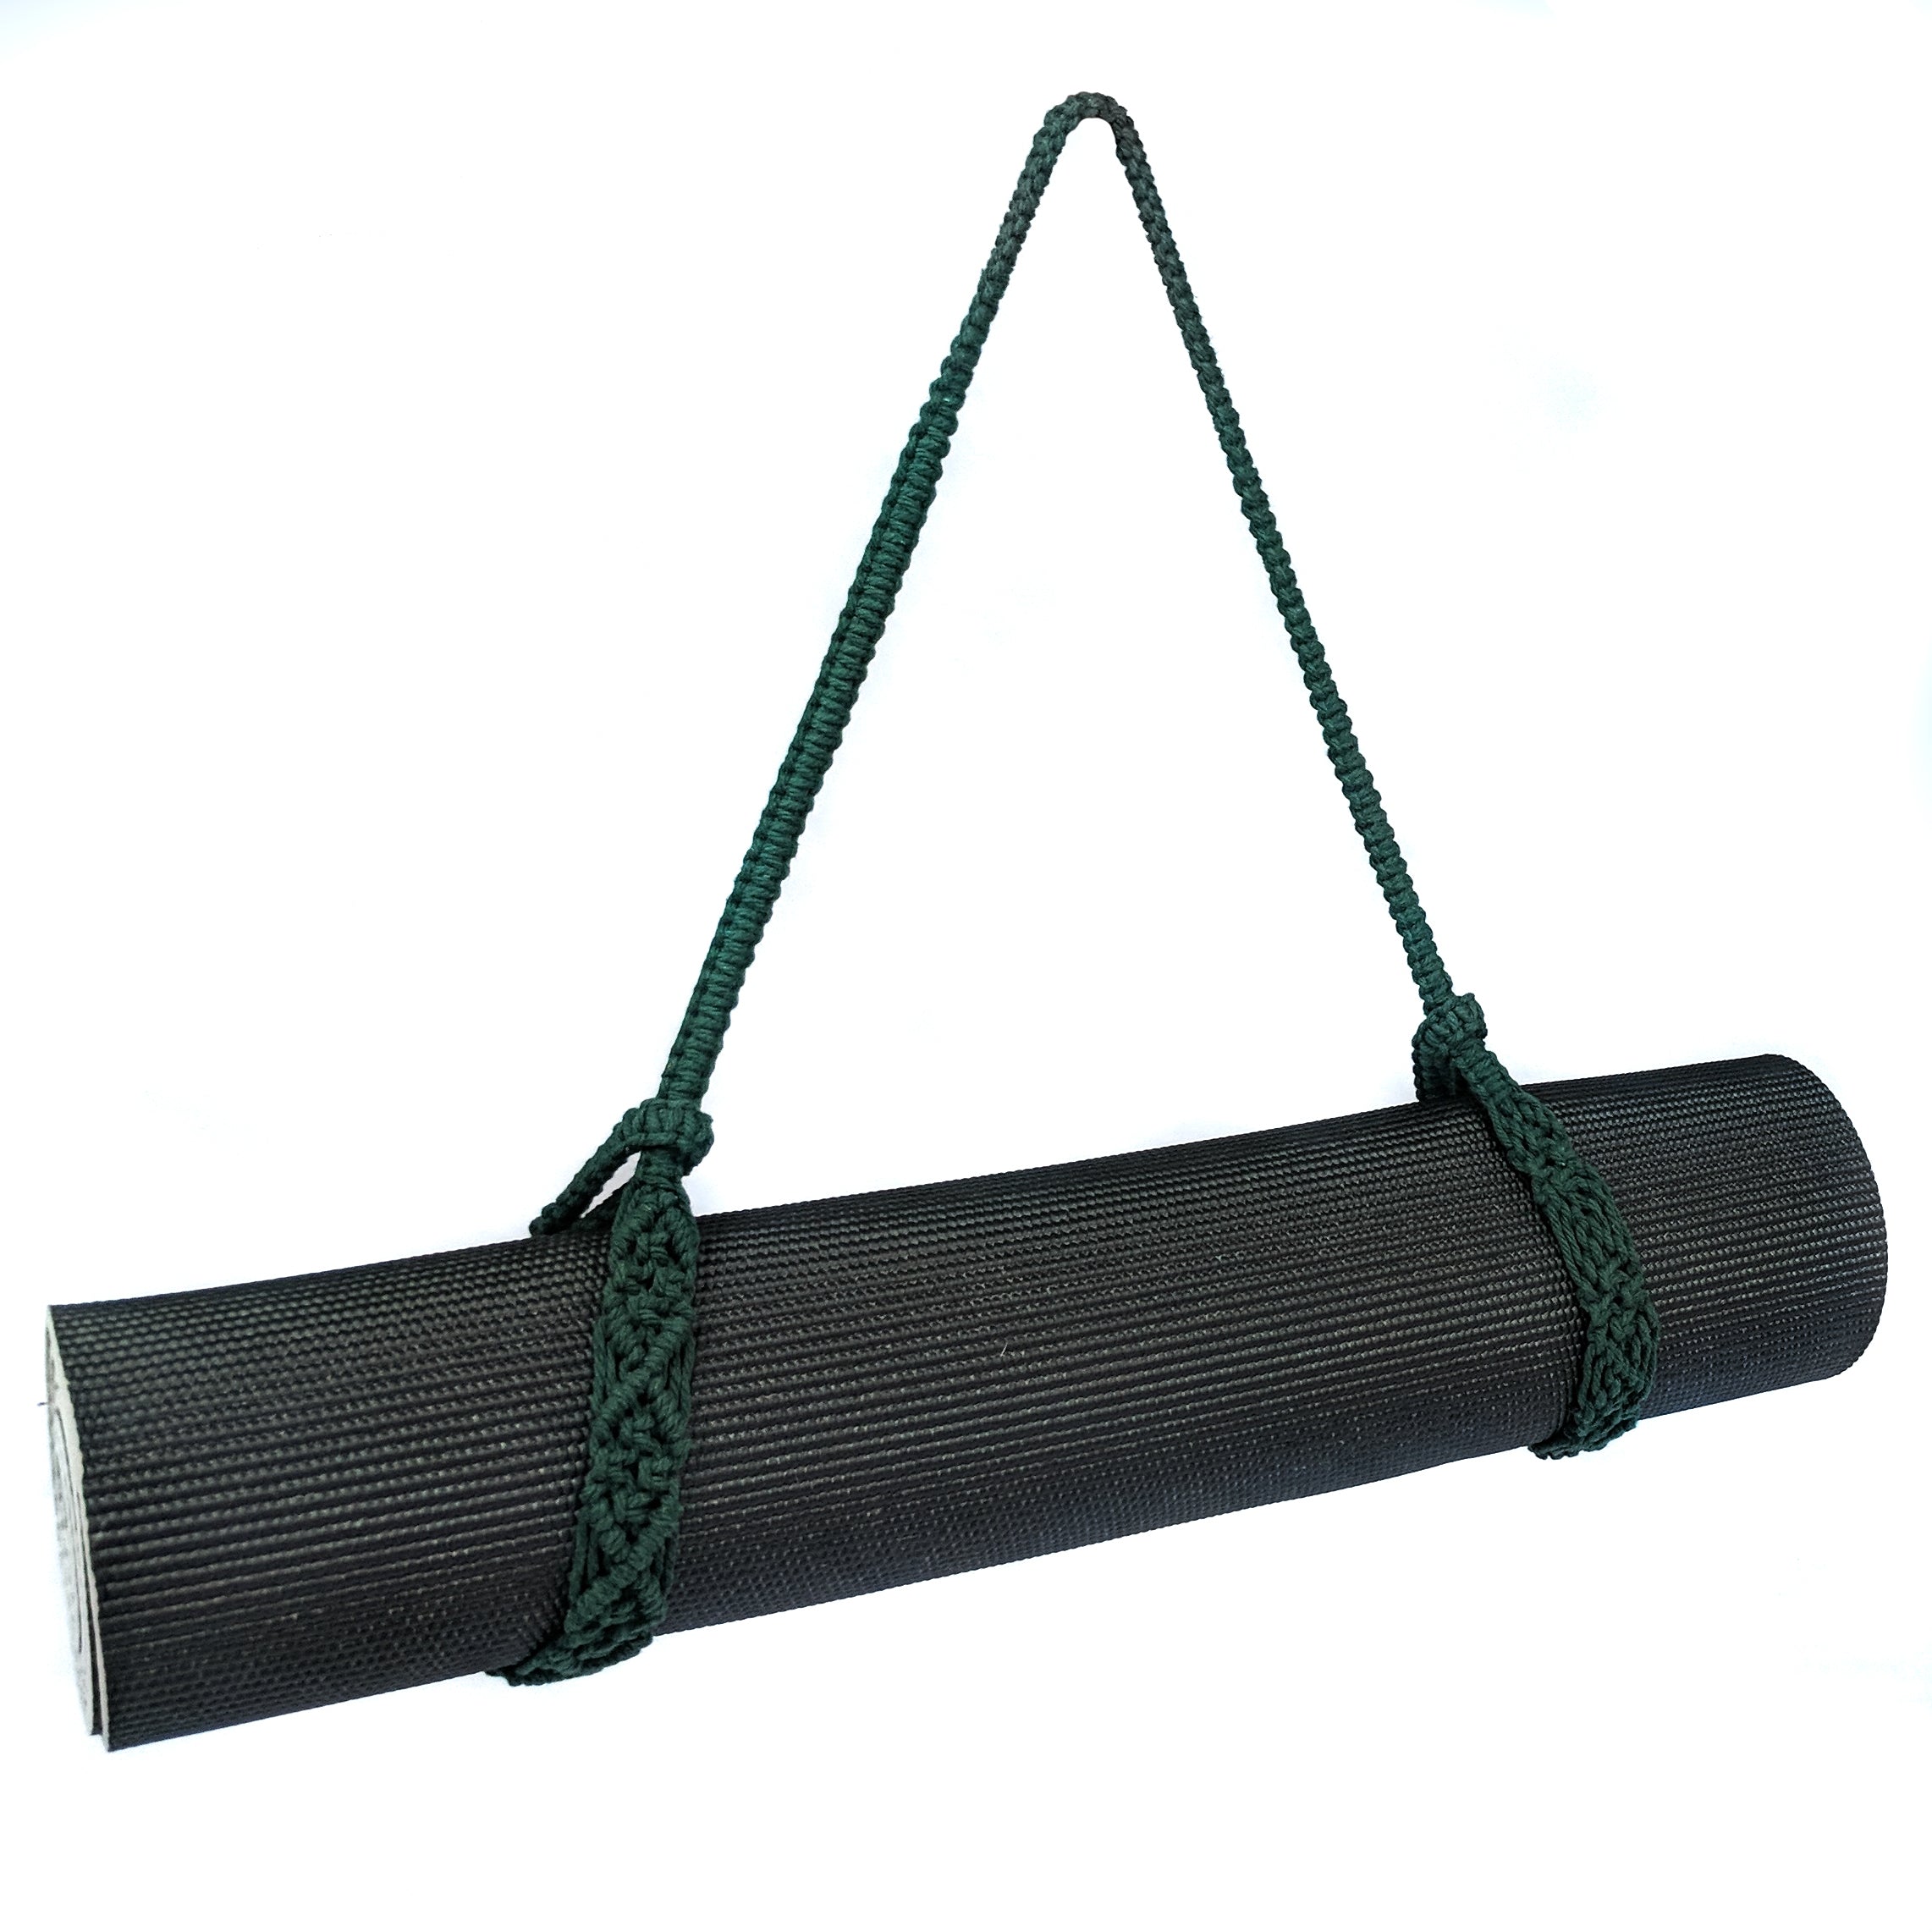 Macrame Yoga Mat Carrying Strap [MAT NOT Included], Hand Woven  Multi-Purpose Strap/Carrier